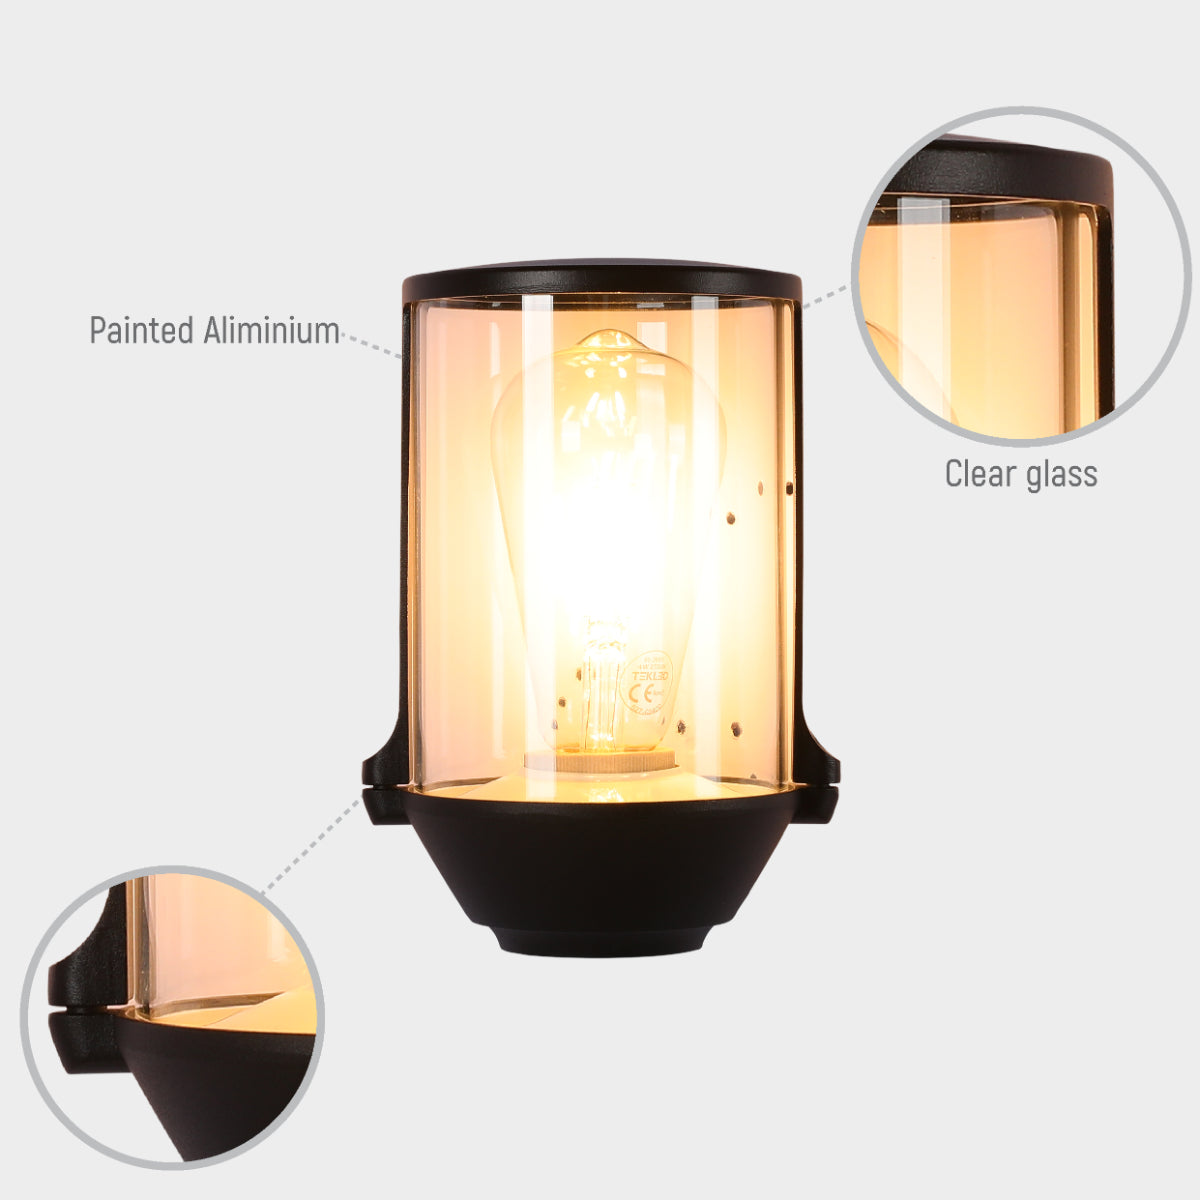 Lighting properties of Lux Vintage Classic Outdoor Wall Light Sconce IP54 Black 182-03423